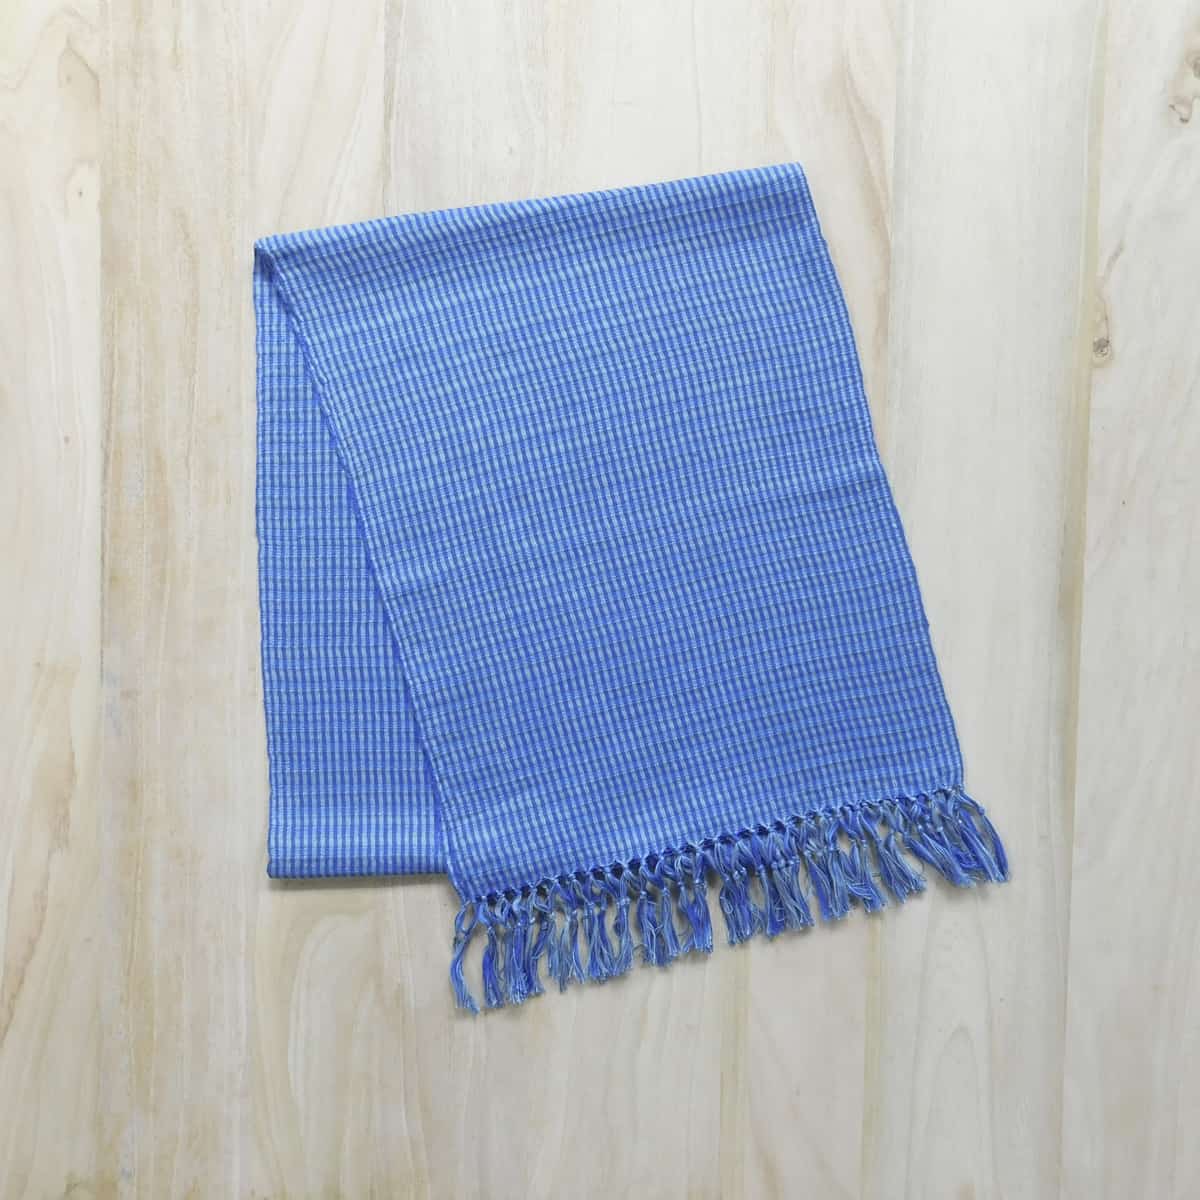 A blue and gray handwoven scarf with a decorative fringe on a light wood background